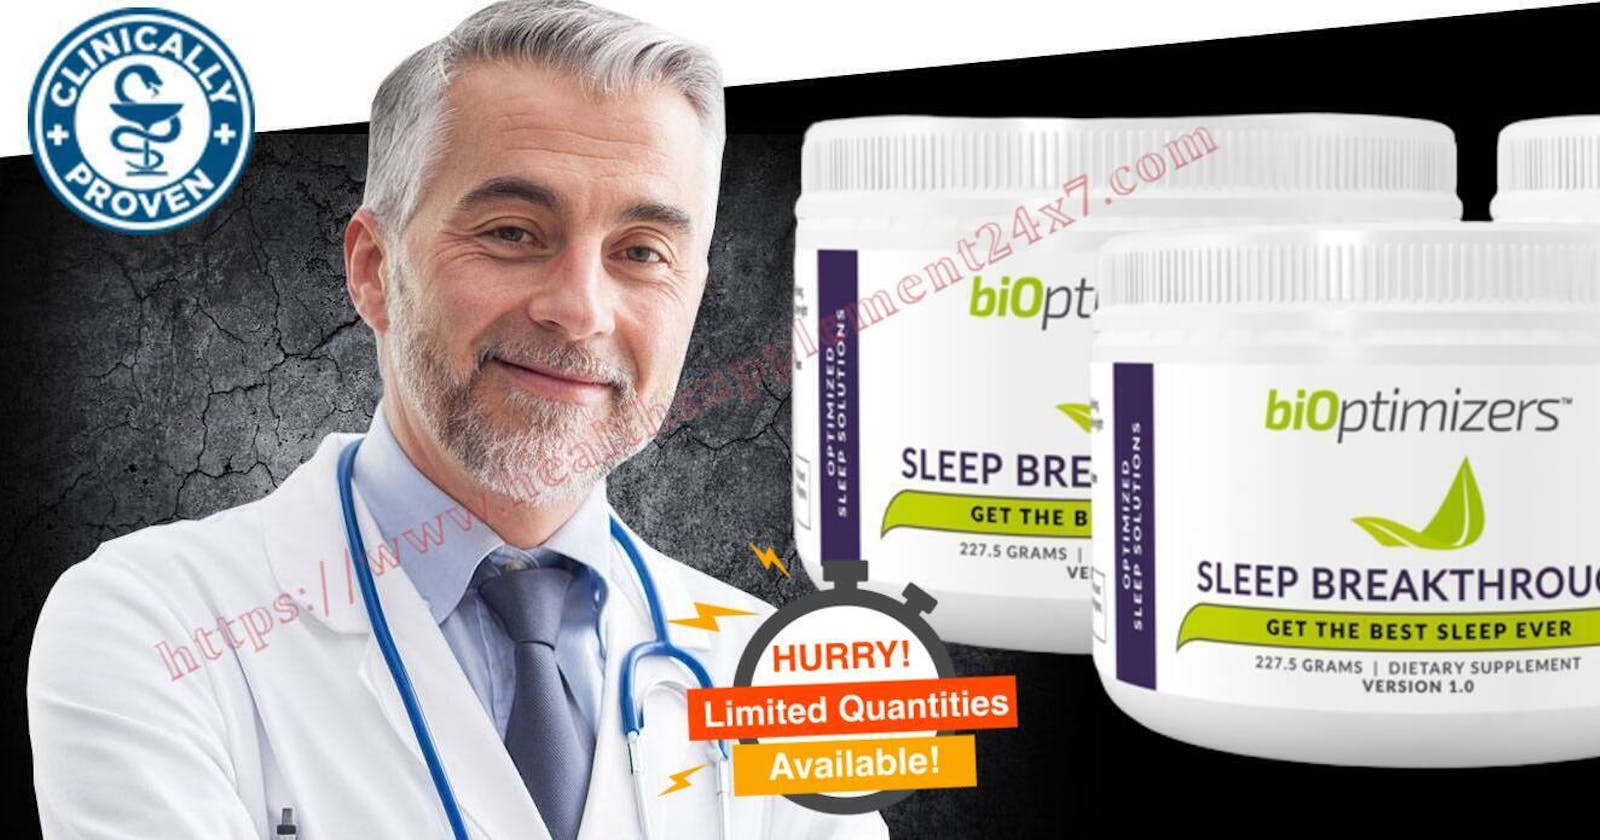 BiOptimizers Sleep Breakthrough [#1 Premium Dietary Supplement] Get Quality Sleep And Helps Fall Asleep Faster(Work Or Hoax)